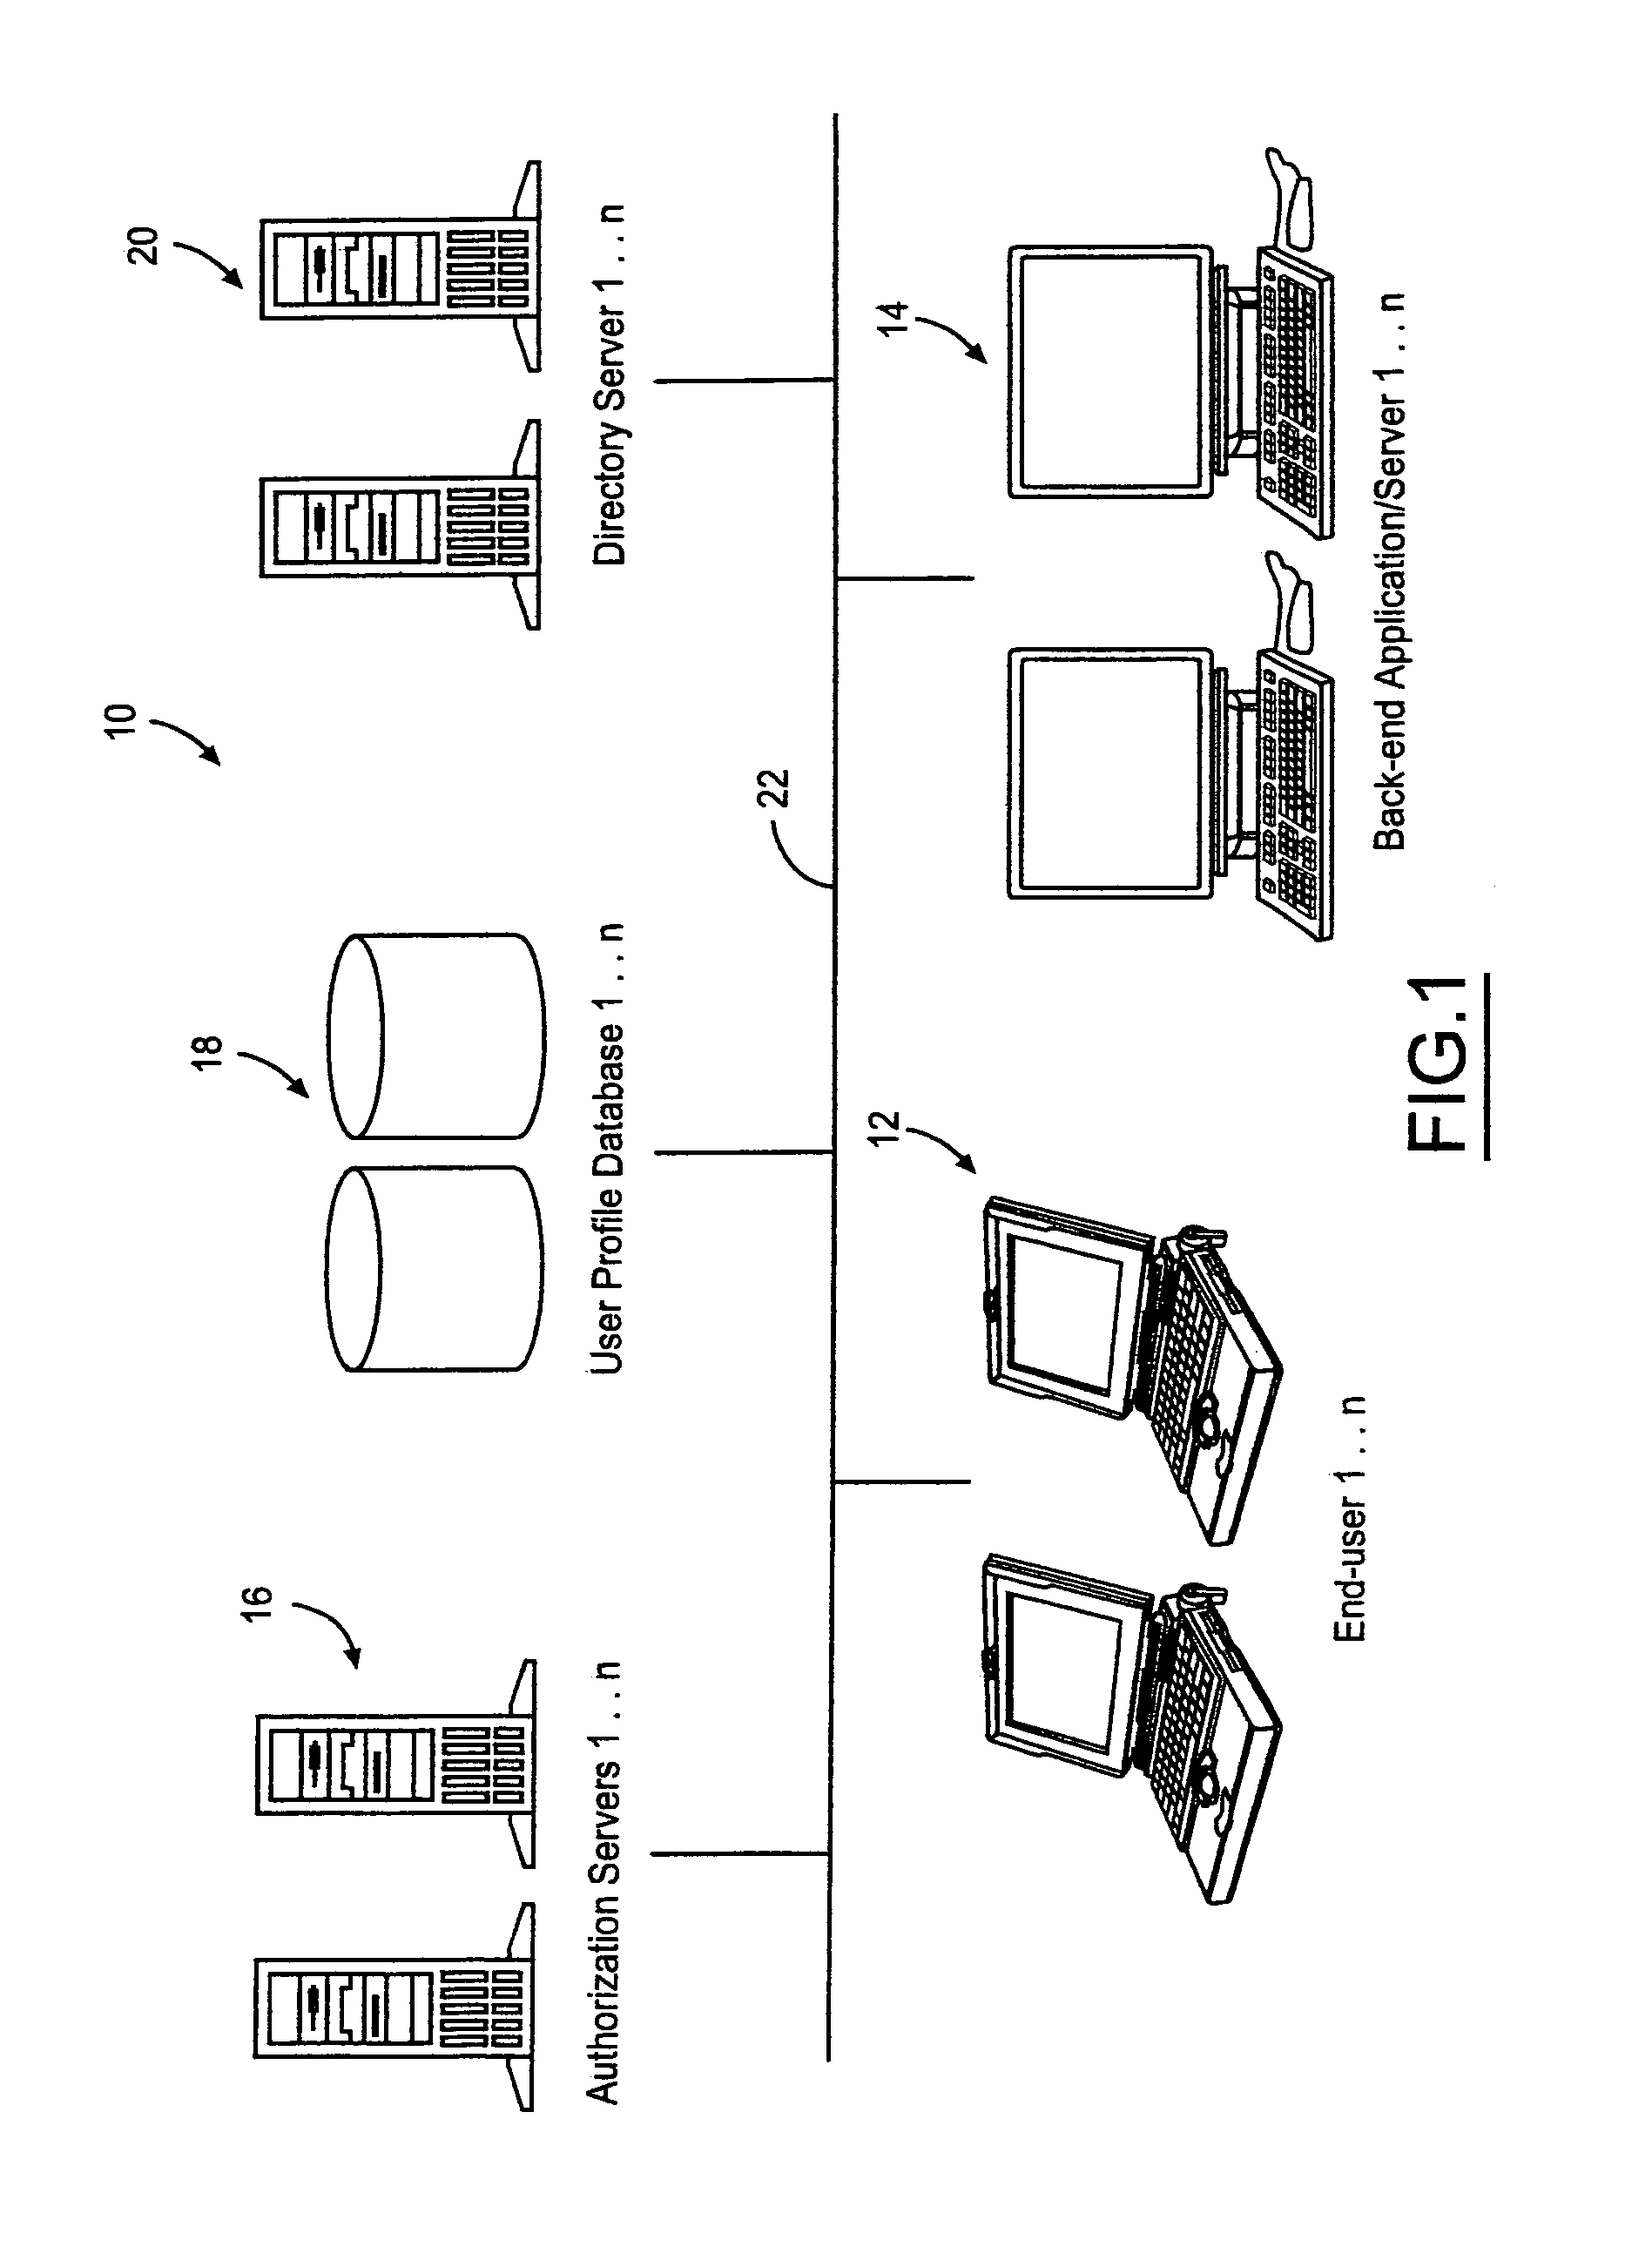 Authentication, application-authorization, and user profiling using dynamic directory services